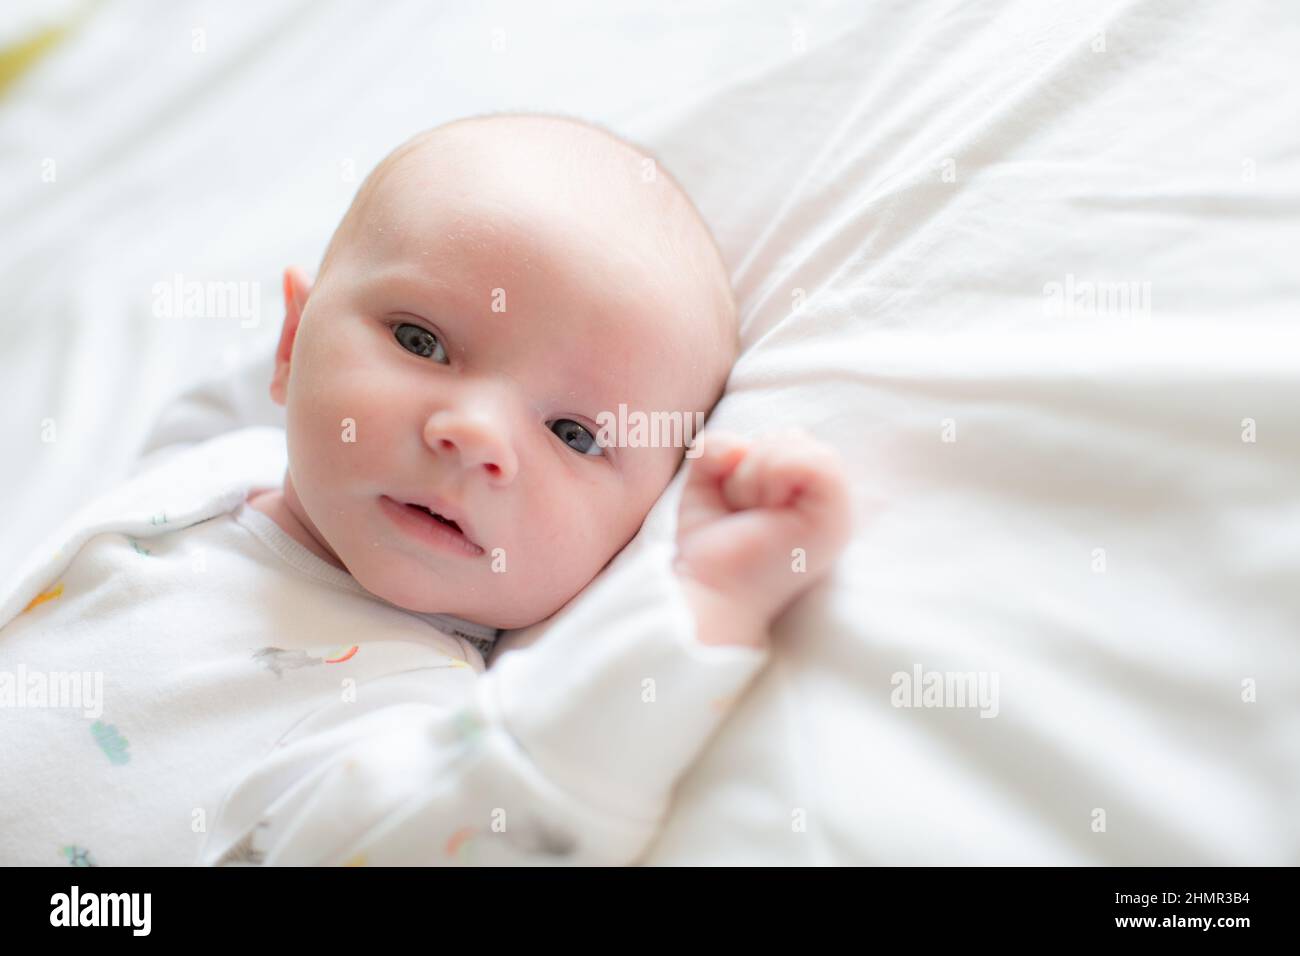 A portrait of a baby in a white babygro on a white background. Stock Photo